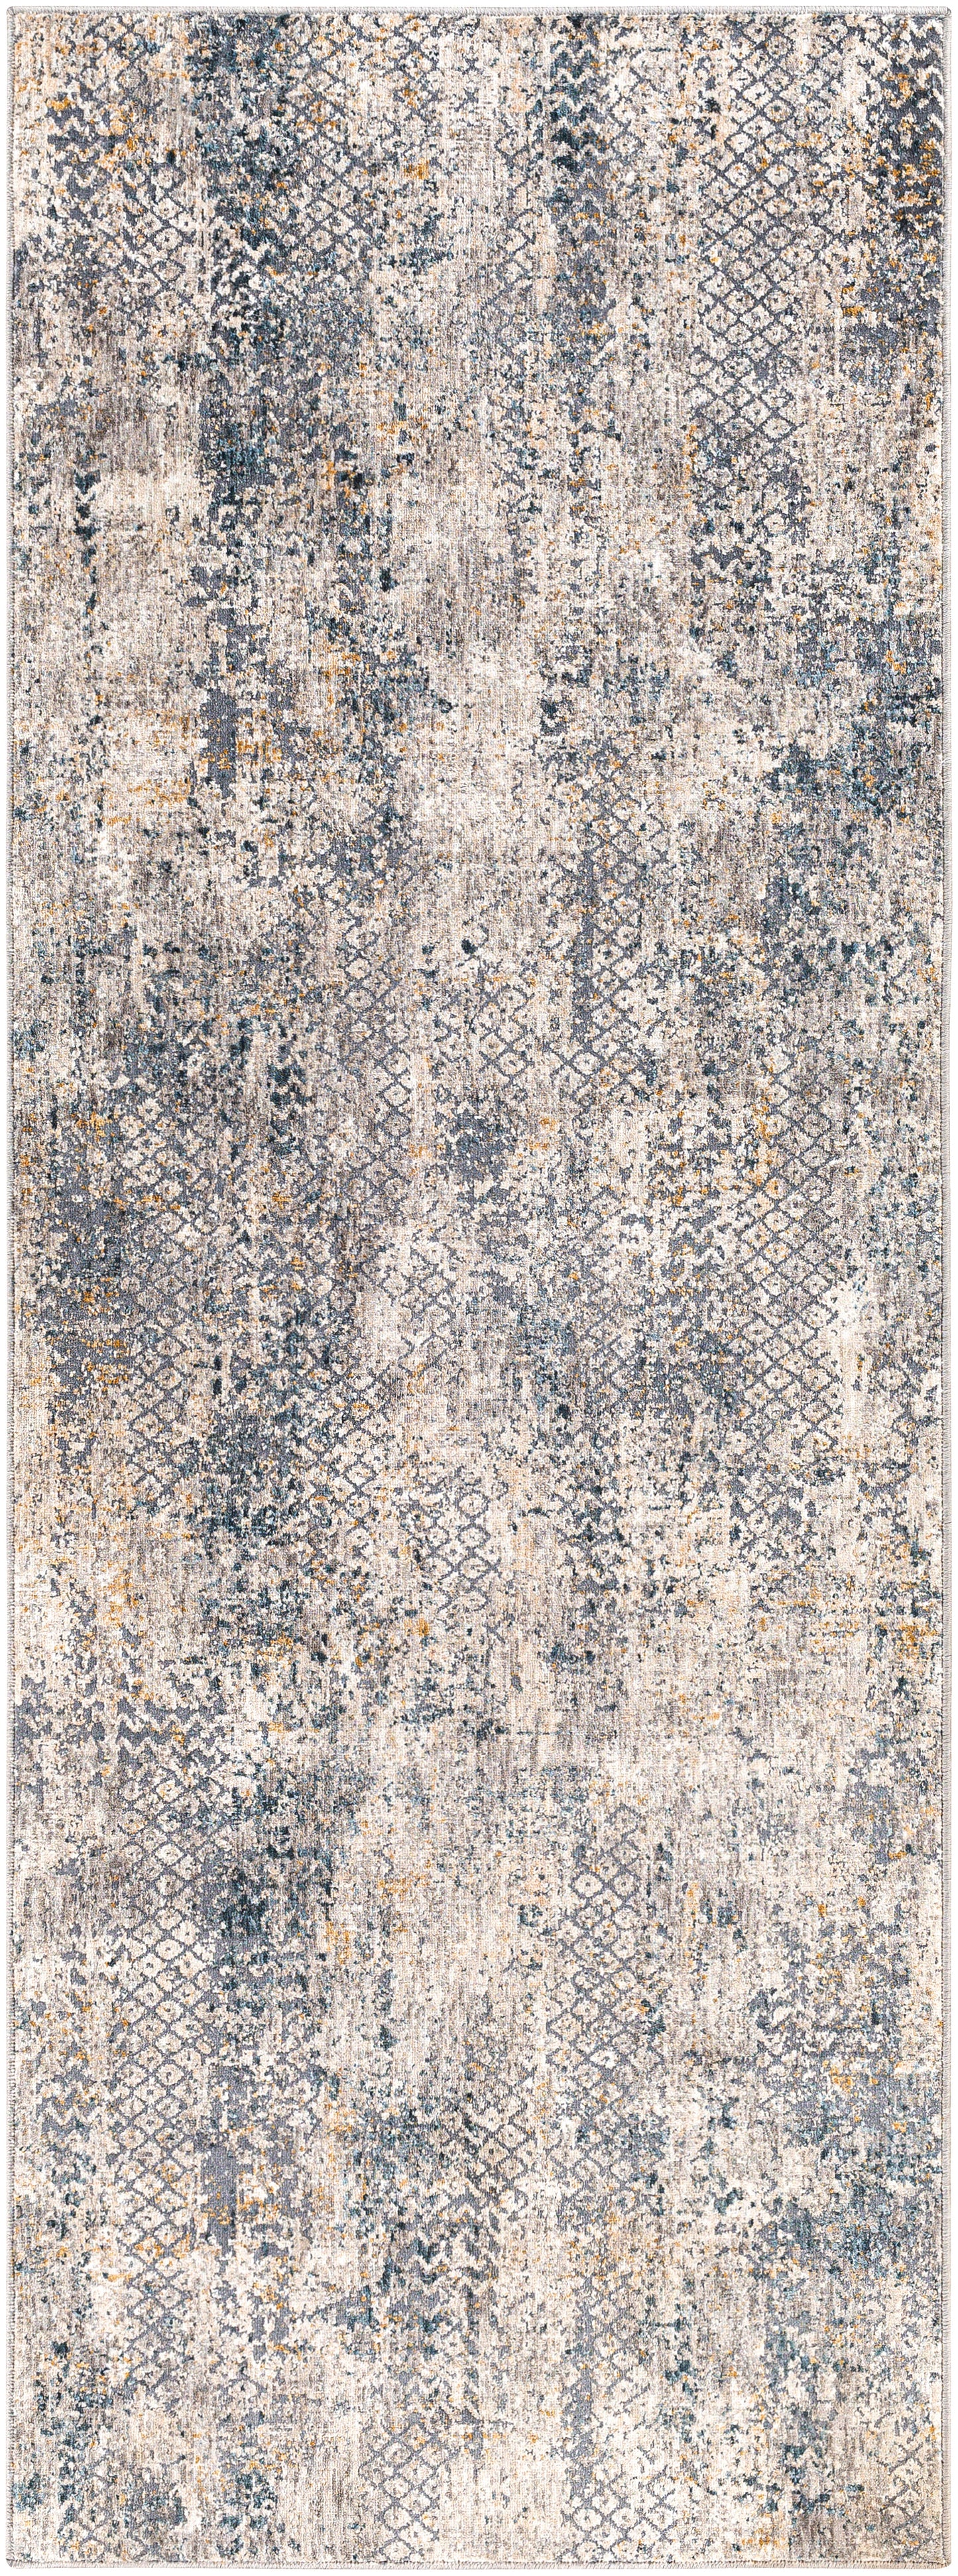 Cardiff 26956 Machine Woven Synthetic Blend Indoor Area Rug by Surya Rugs